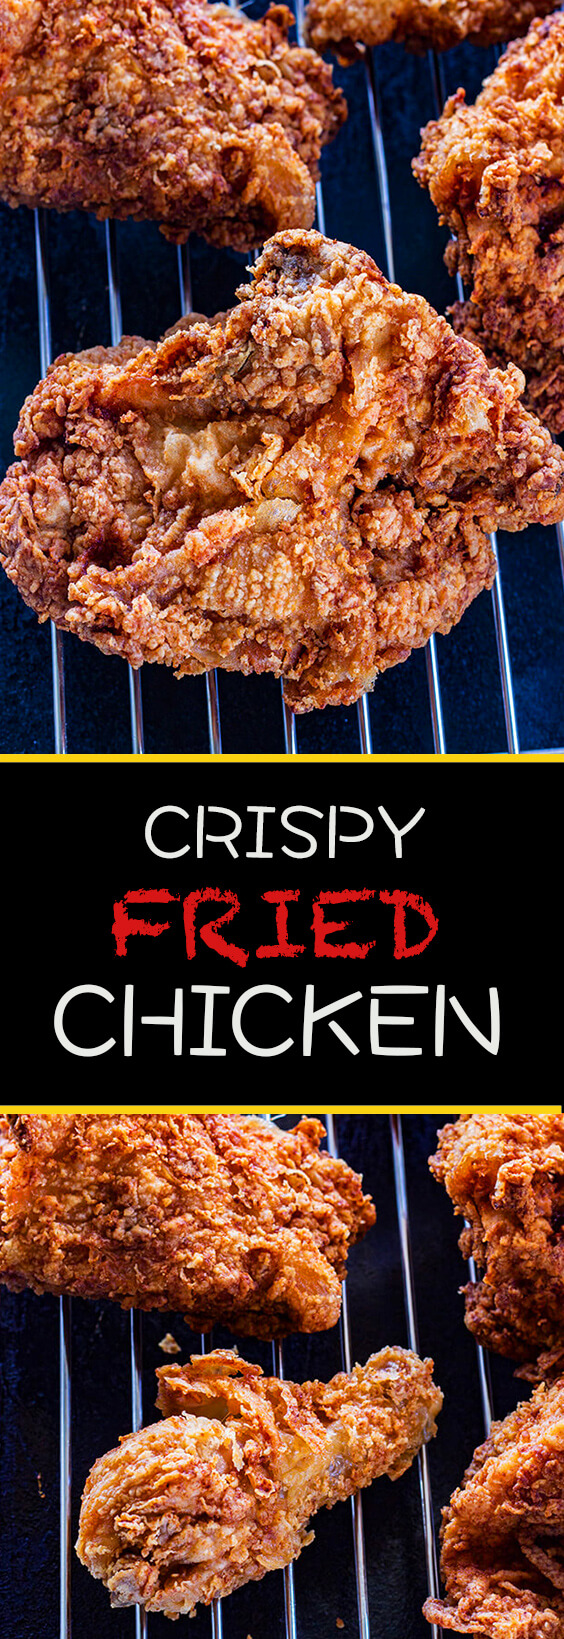 This crispy fried chicken recipe is a picnic favorite. Easy enough for weeknight dinners or Sunday get togethers. Wonderfully crisp and perfectly seasoned. Make it and love it!